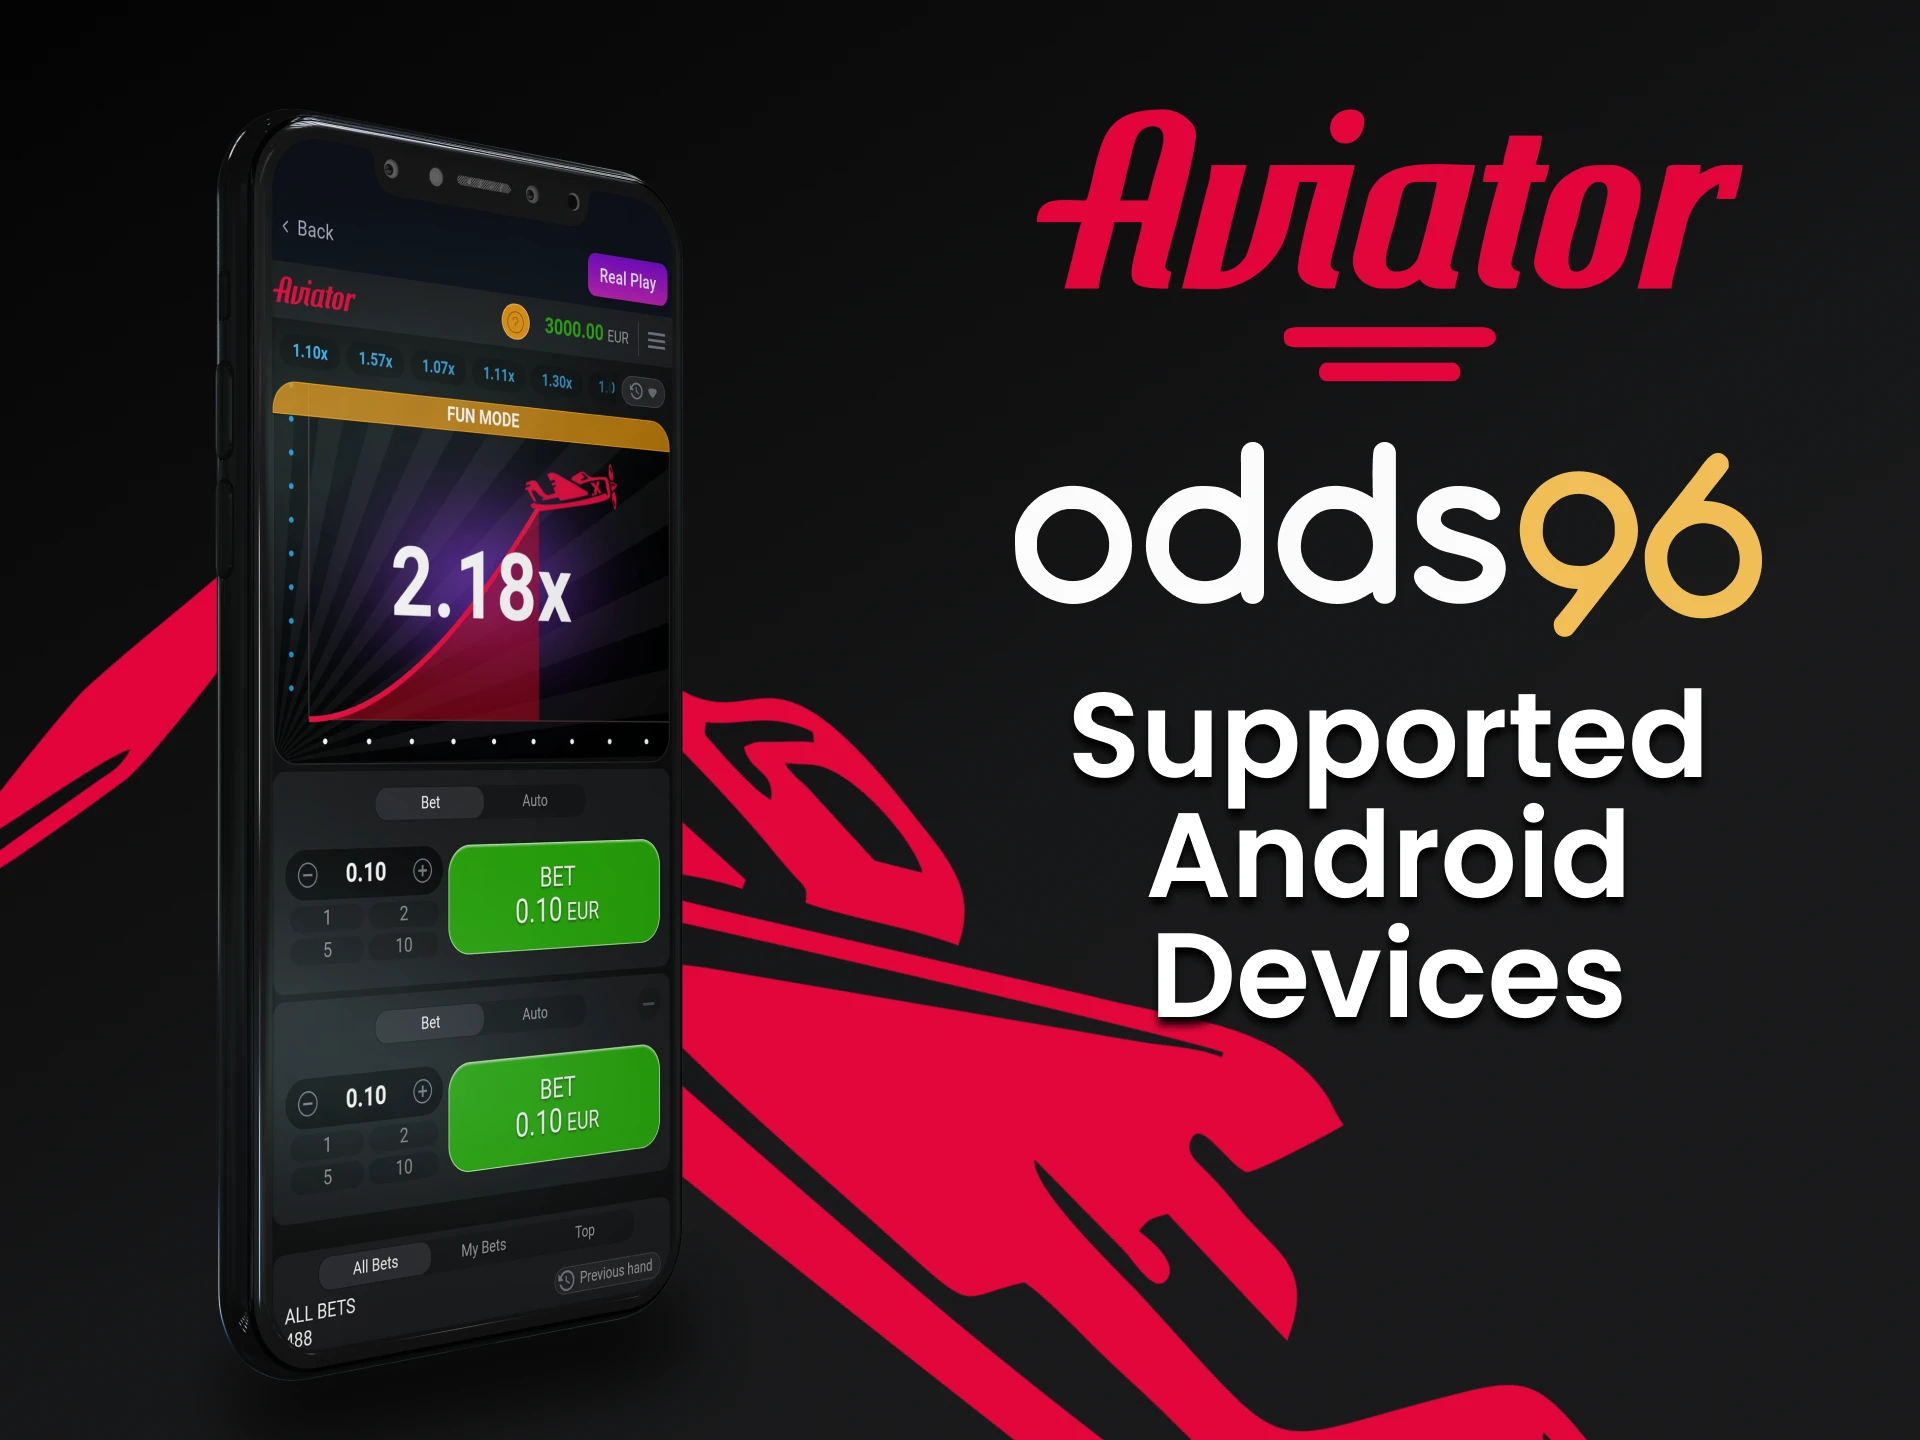 Play Aviator on Odds96 through your Android device.